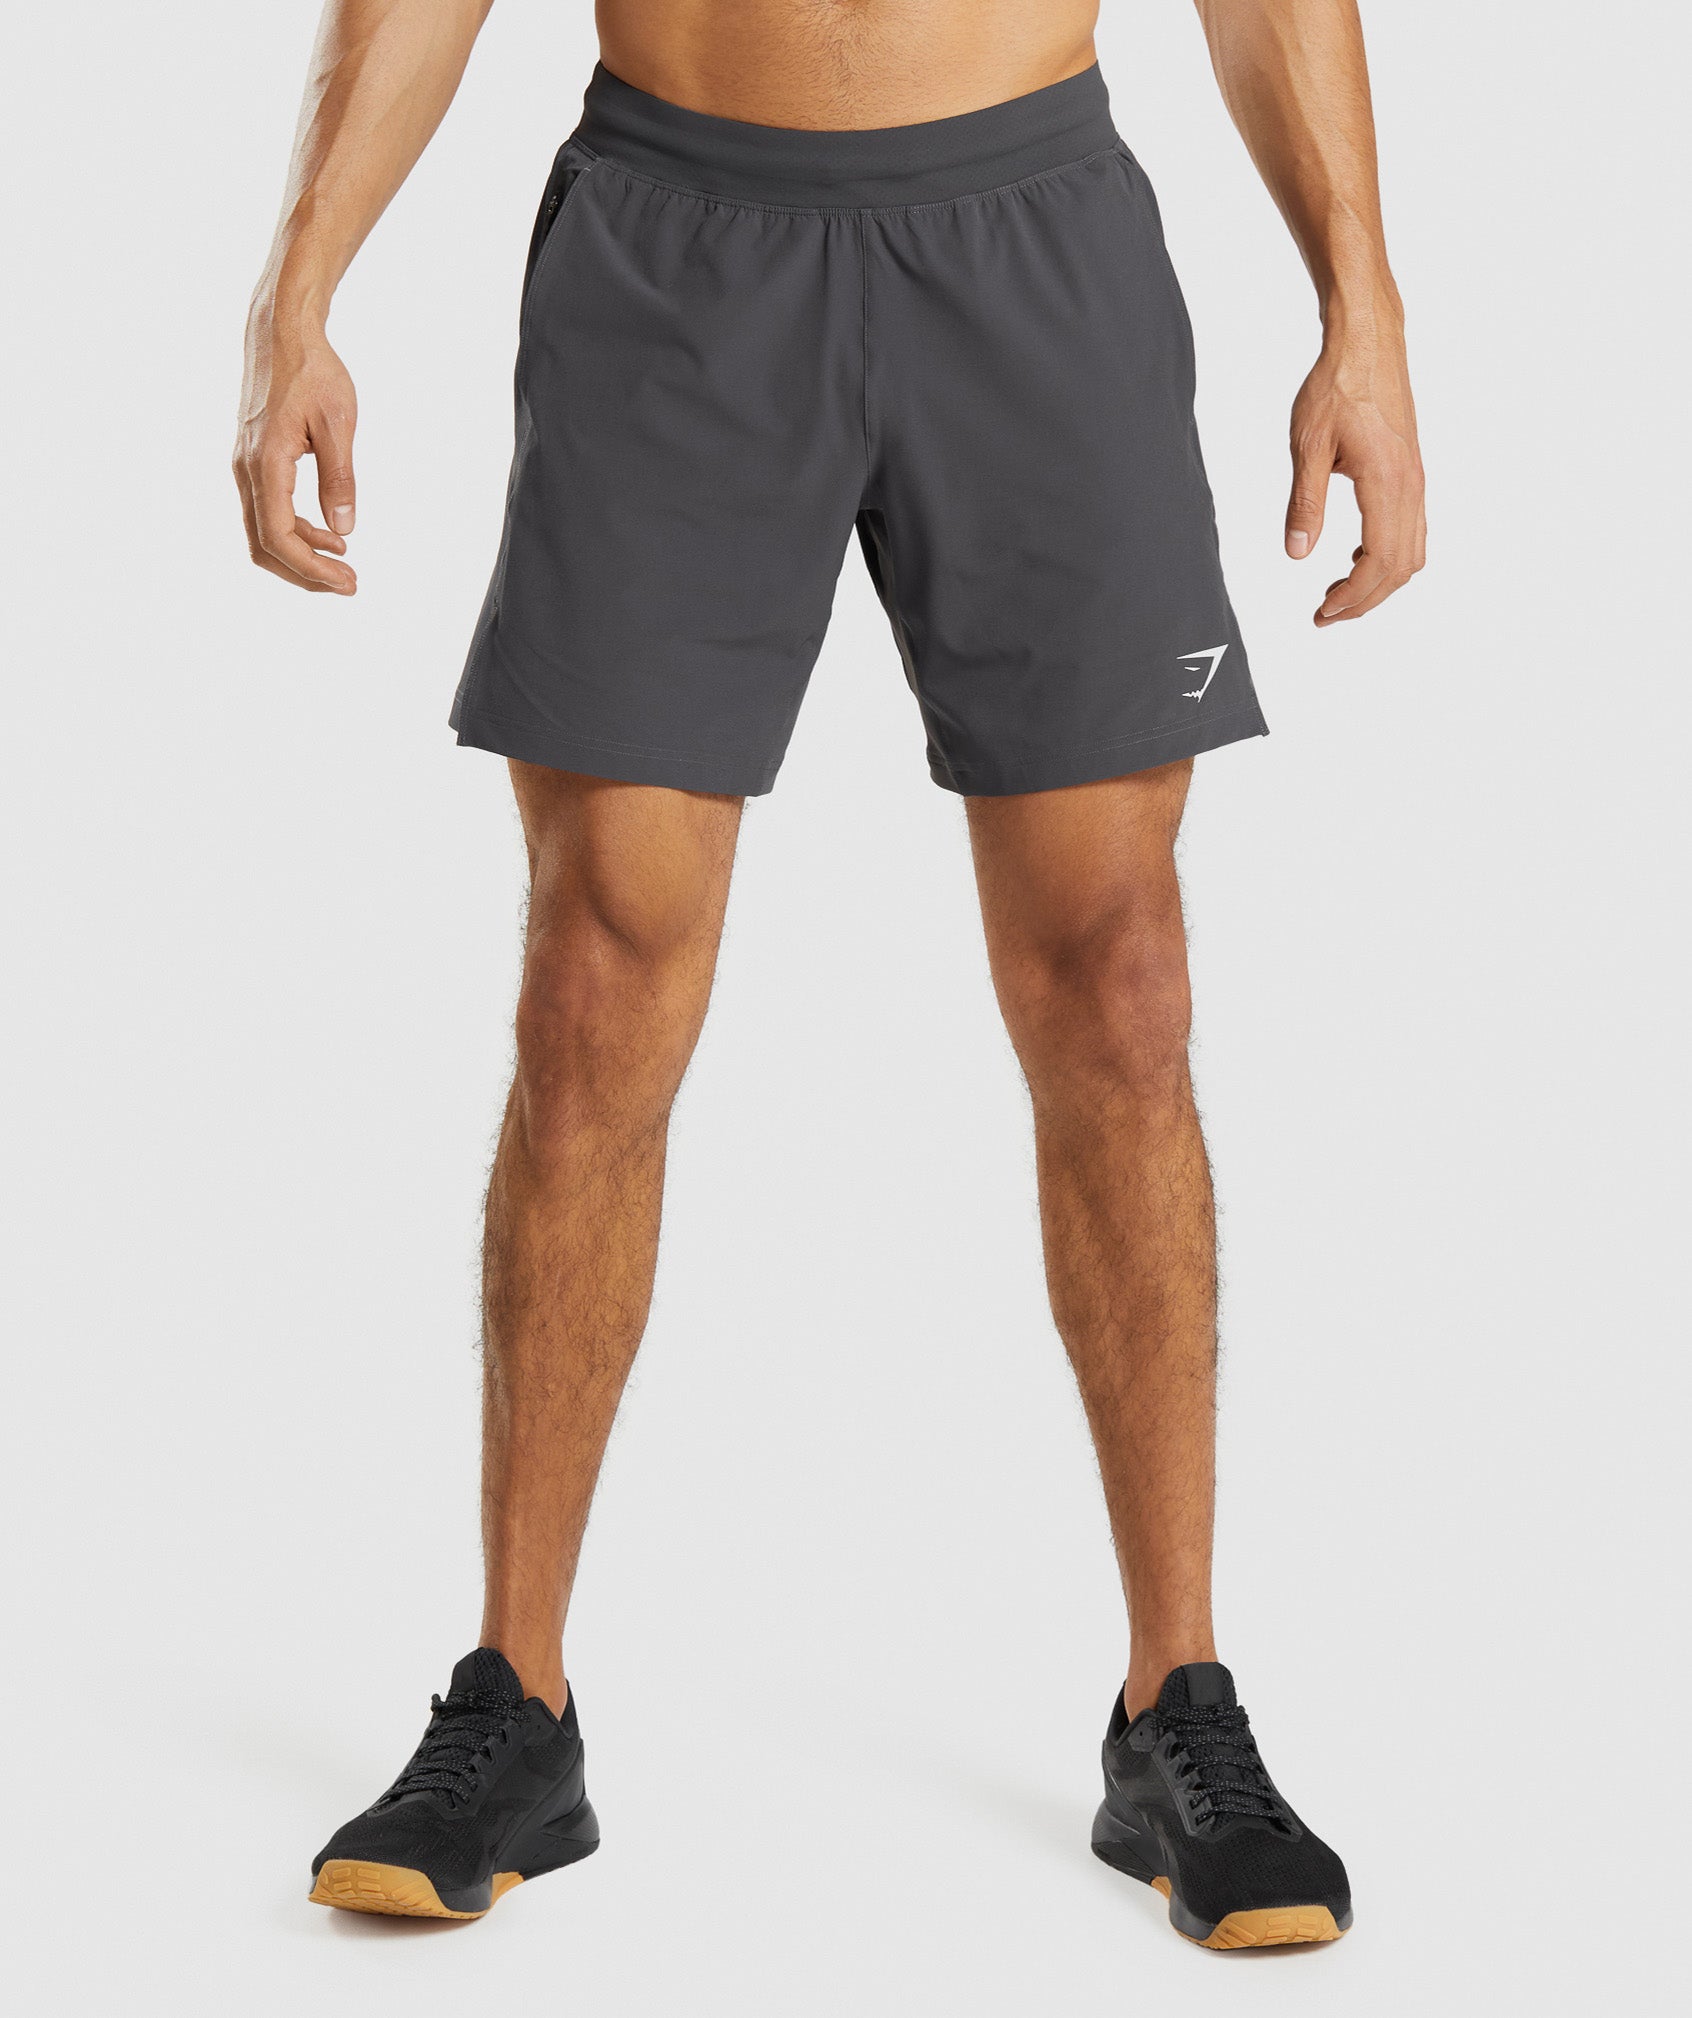 Apex 8" Function Shorts in Onyx Grey - view 1